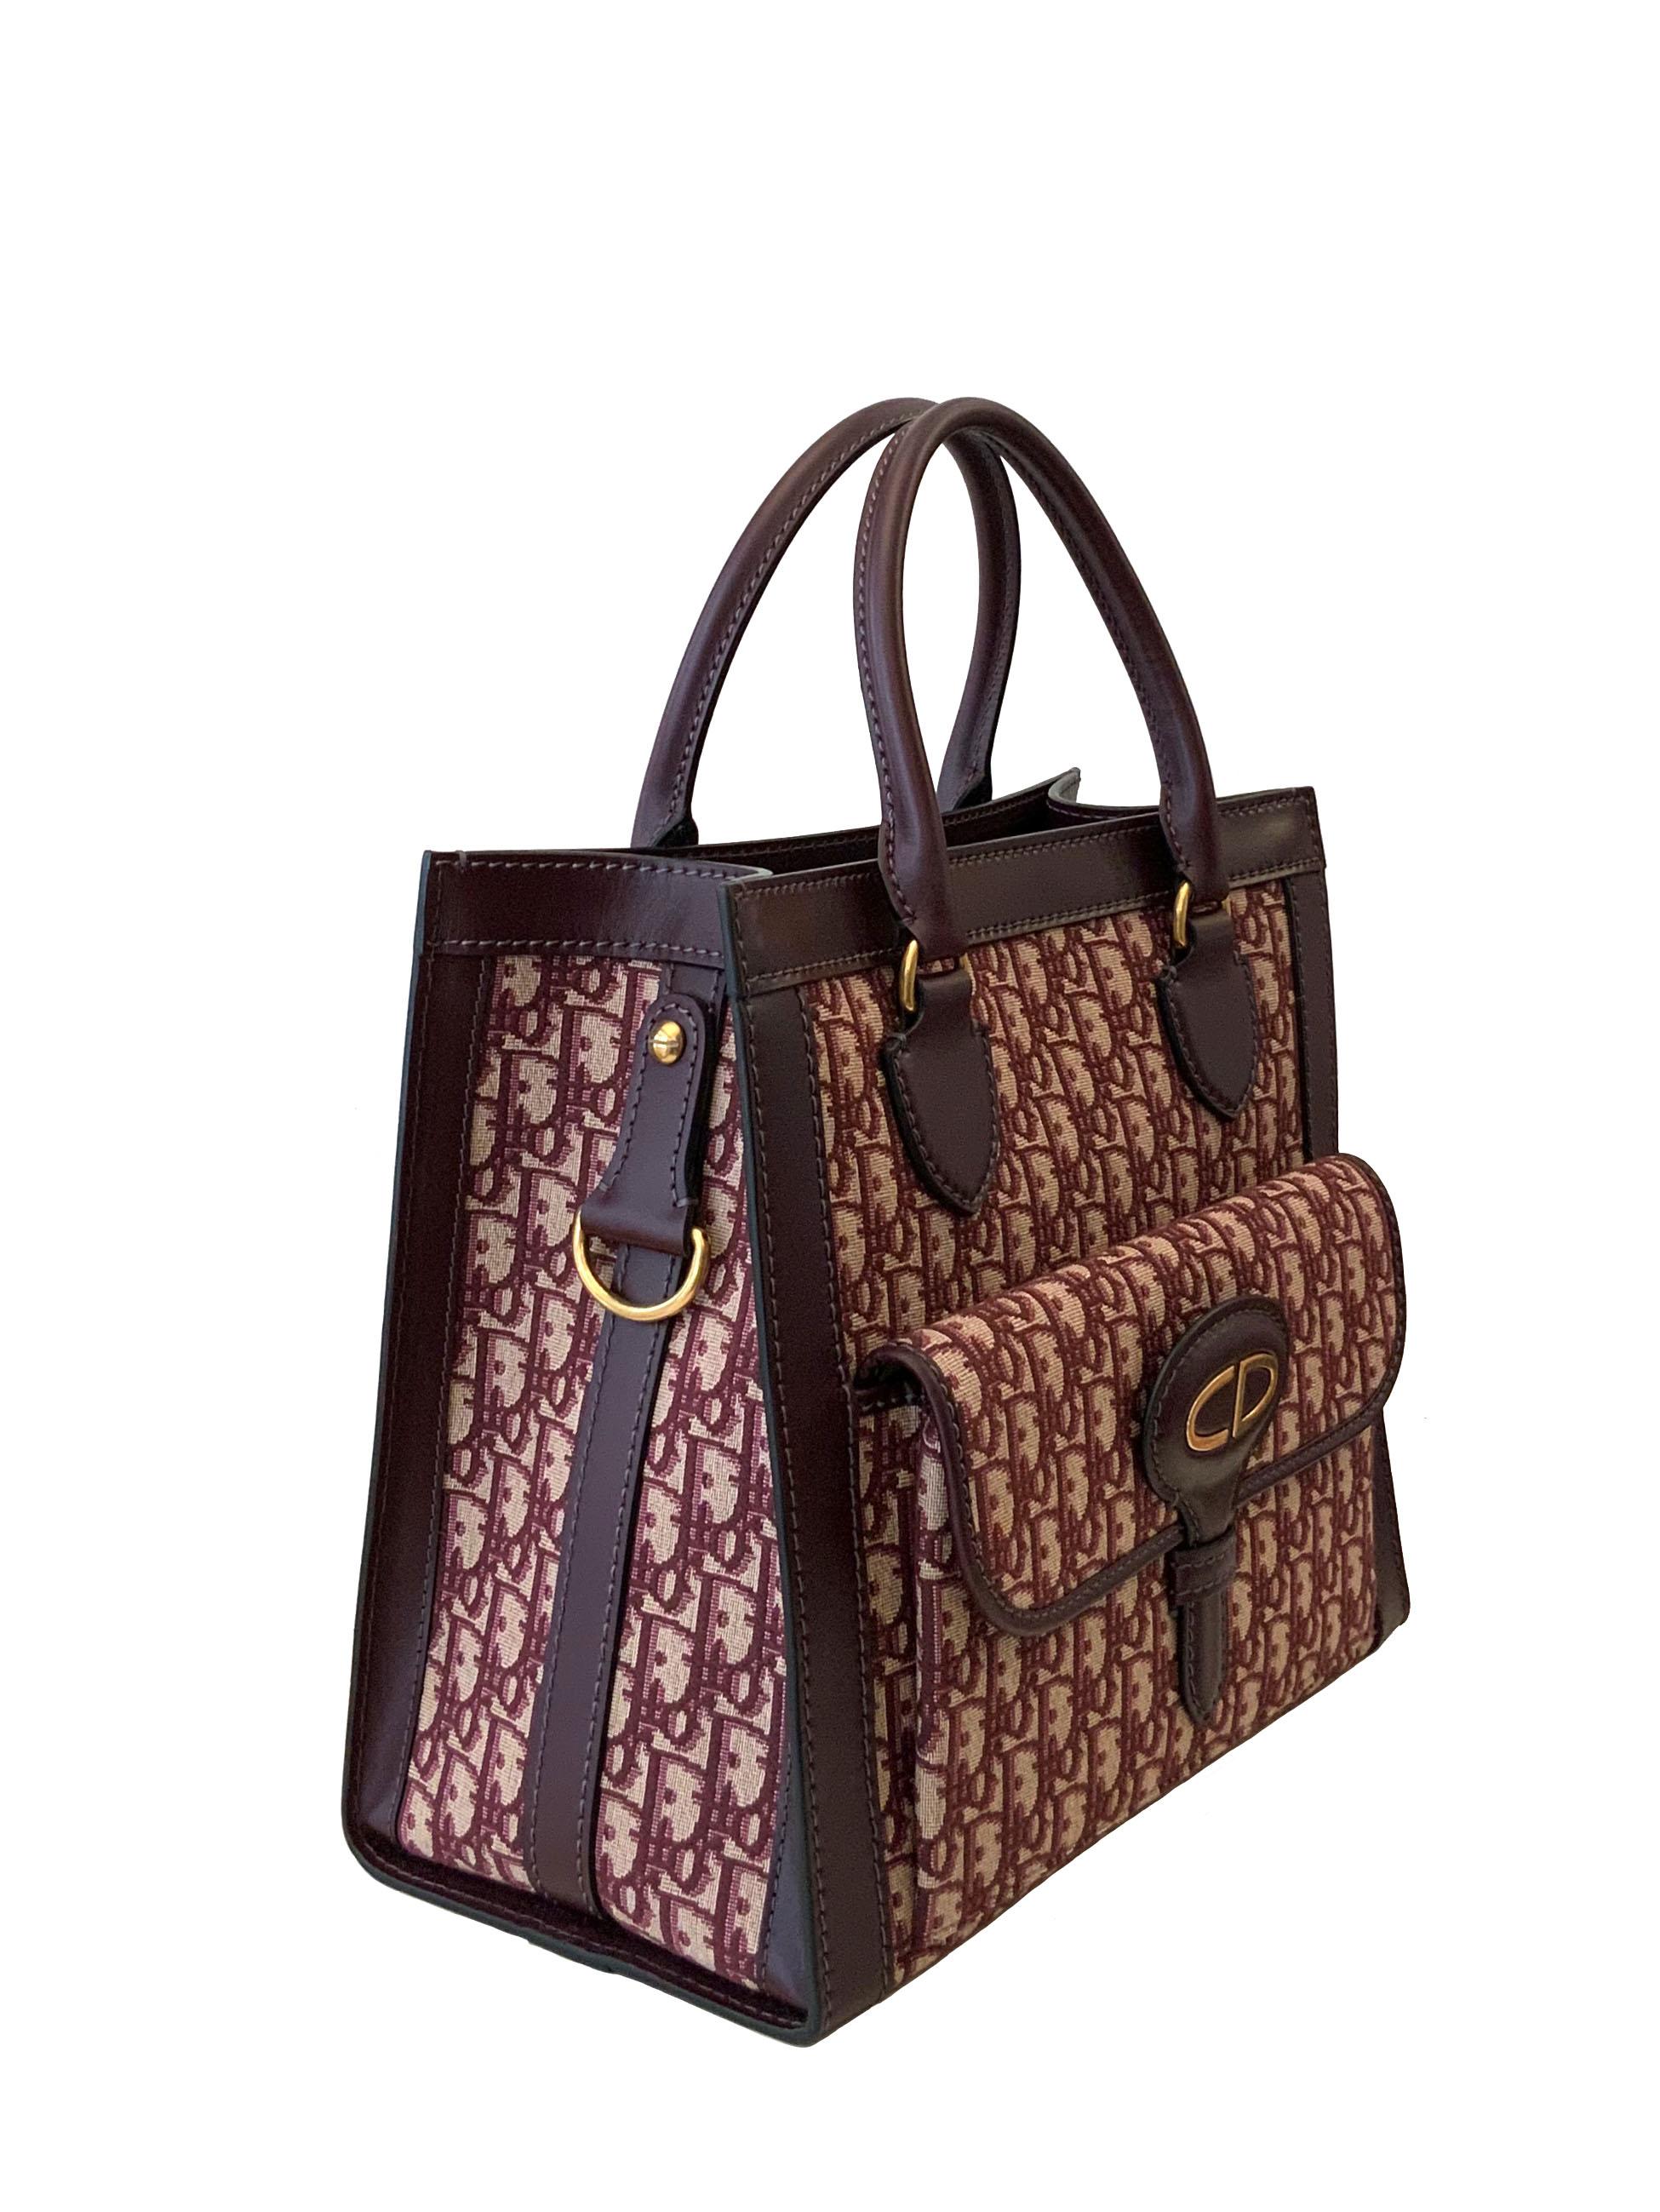 This pre-owned but new tote bag from Christian Dior is crafted in the Dior Monogram canvas in burgundy.
It features two smooth calfskin leather rolled top handles, an exterieur flap compartment and a wide detachable and ajustable shoulder strap.
The